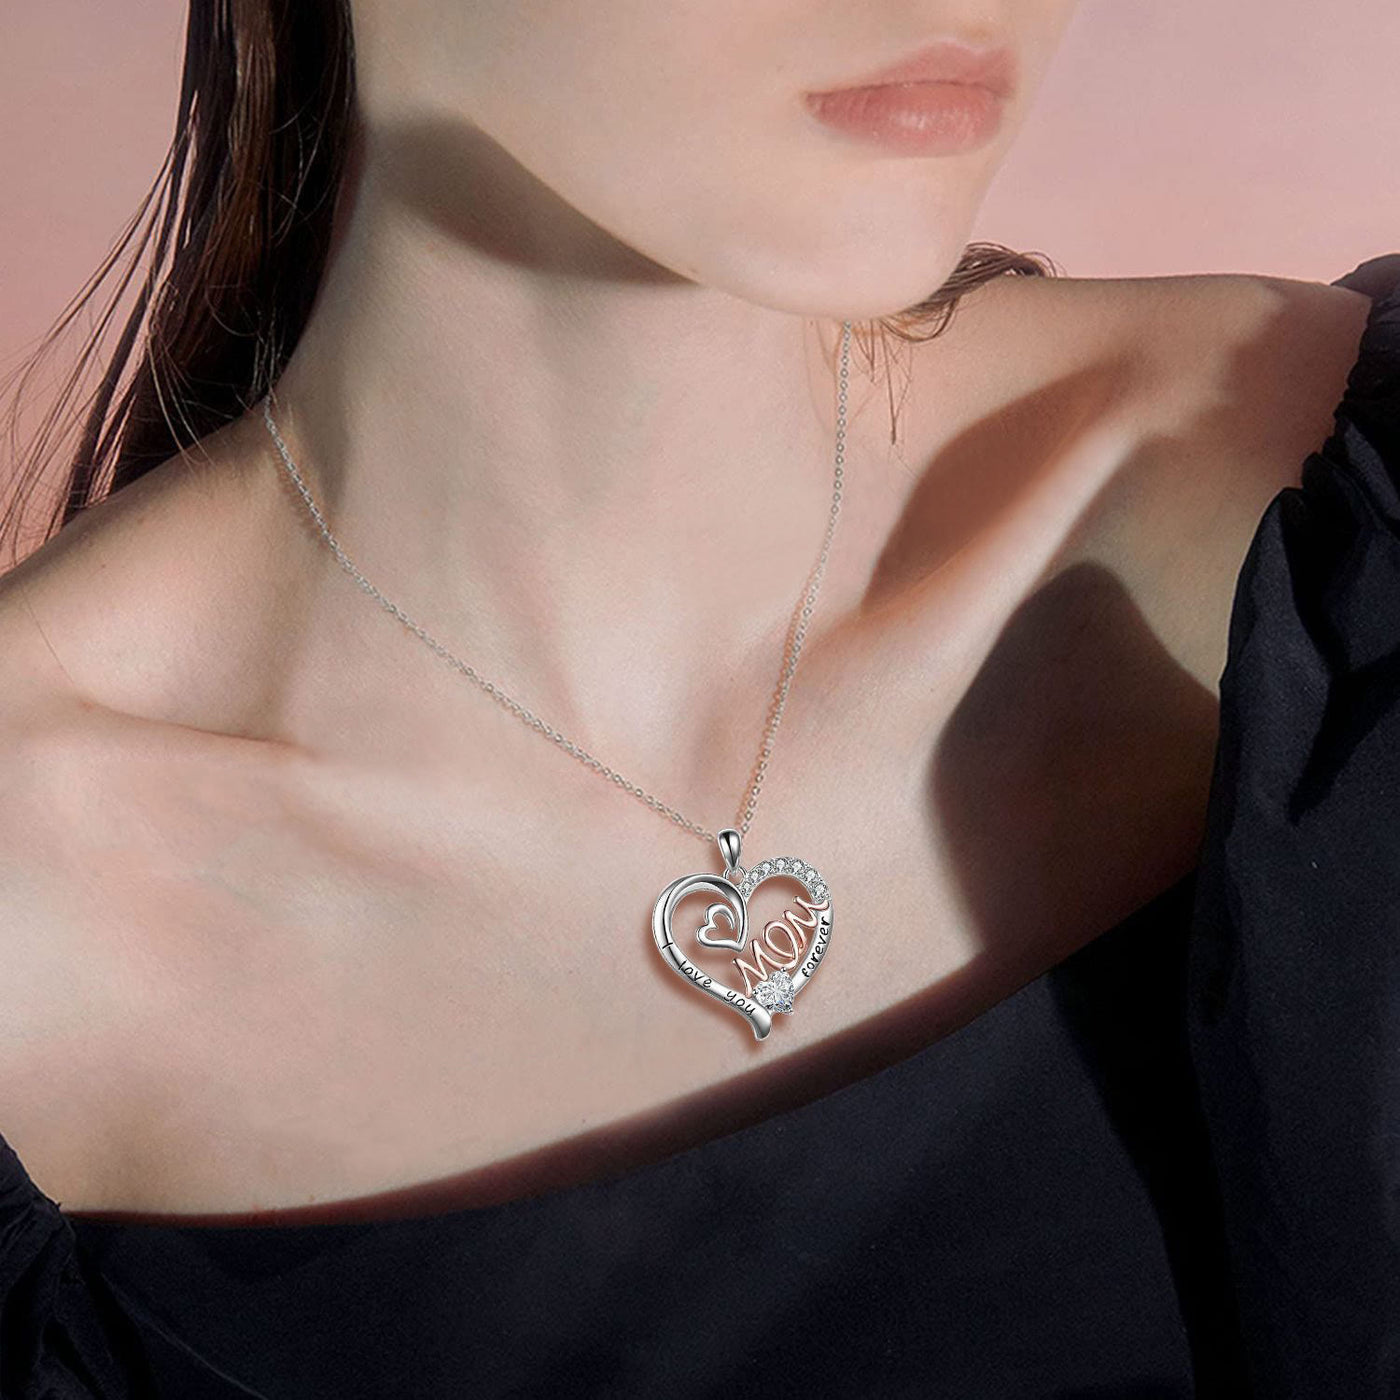 "I Love Your Forever" - Mom With Heart Necklace